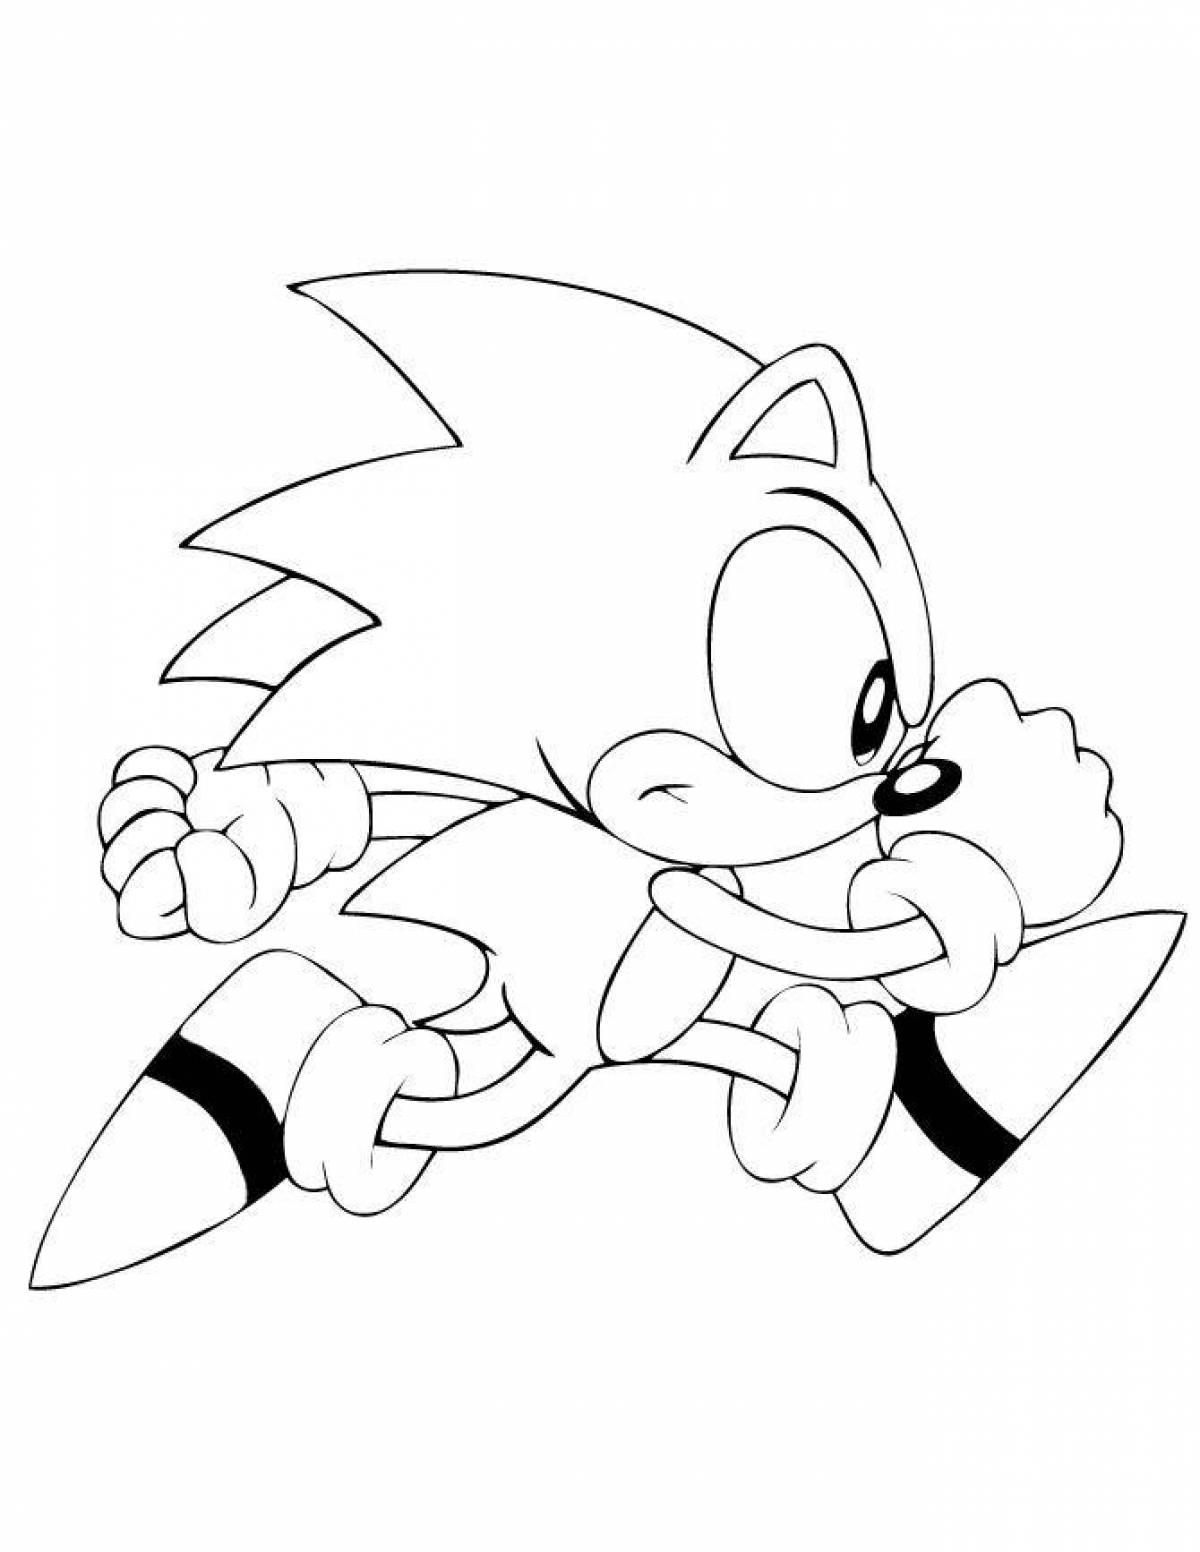 Black sonic bold coloring